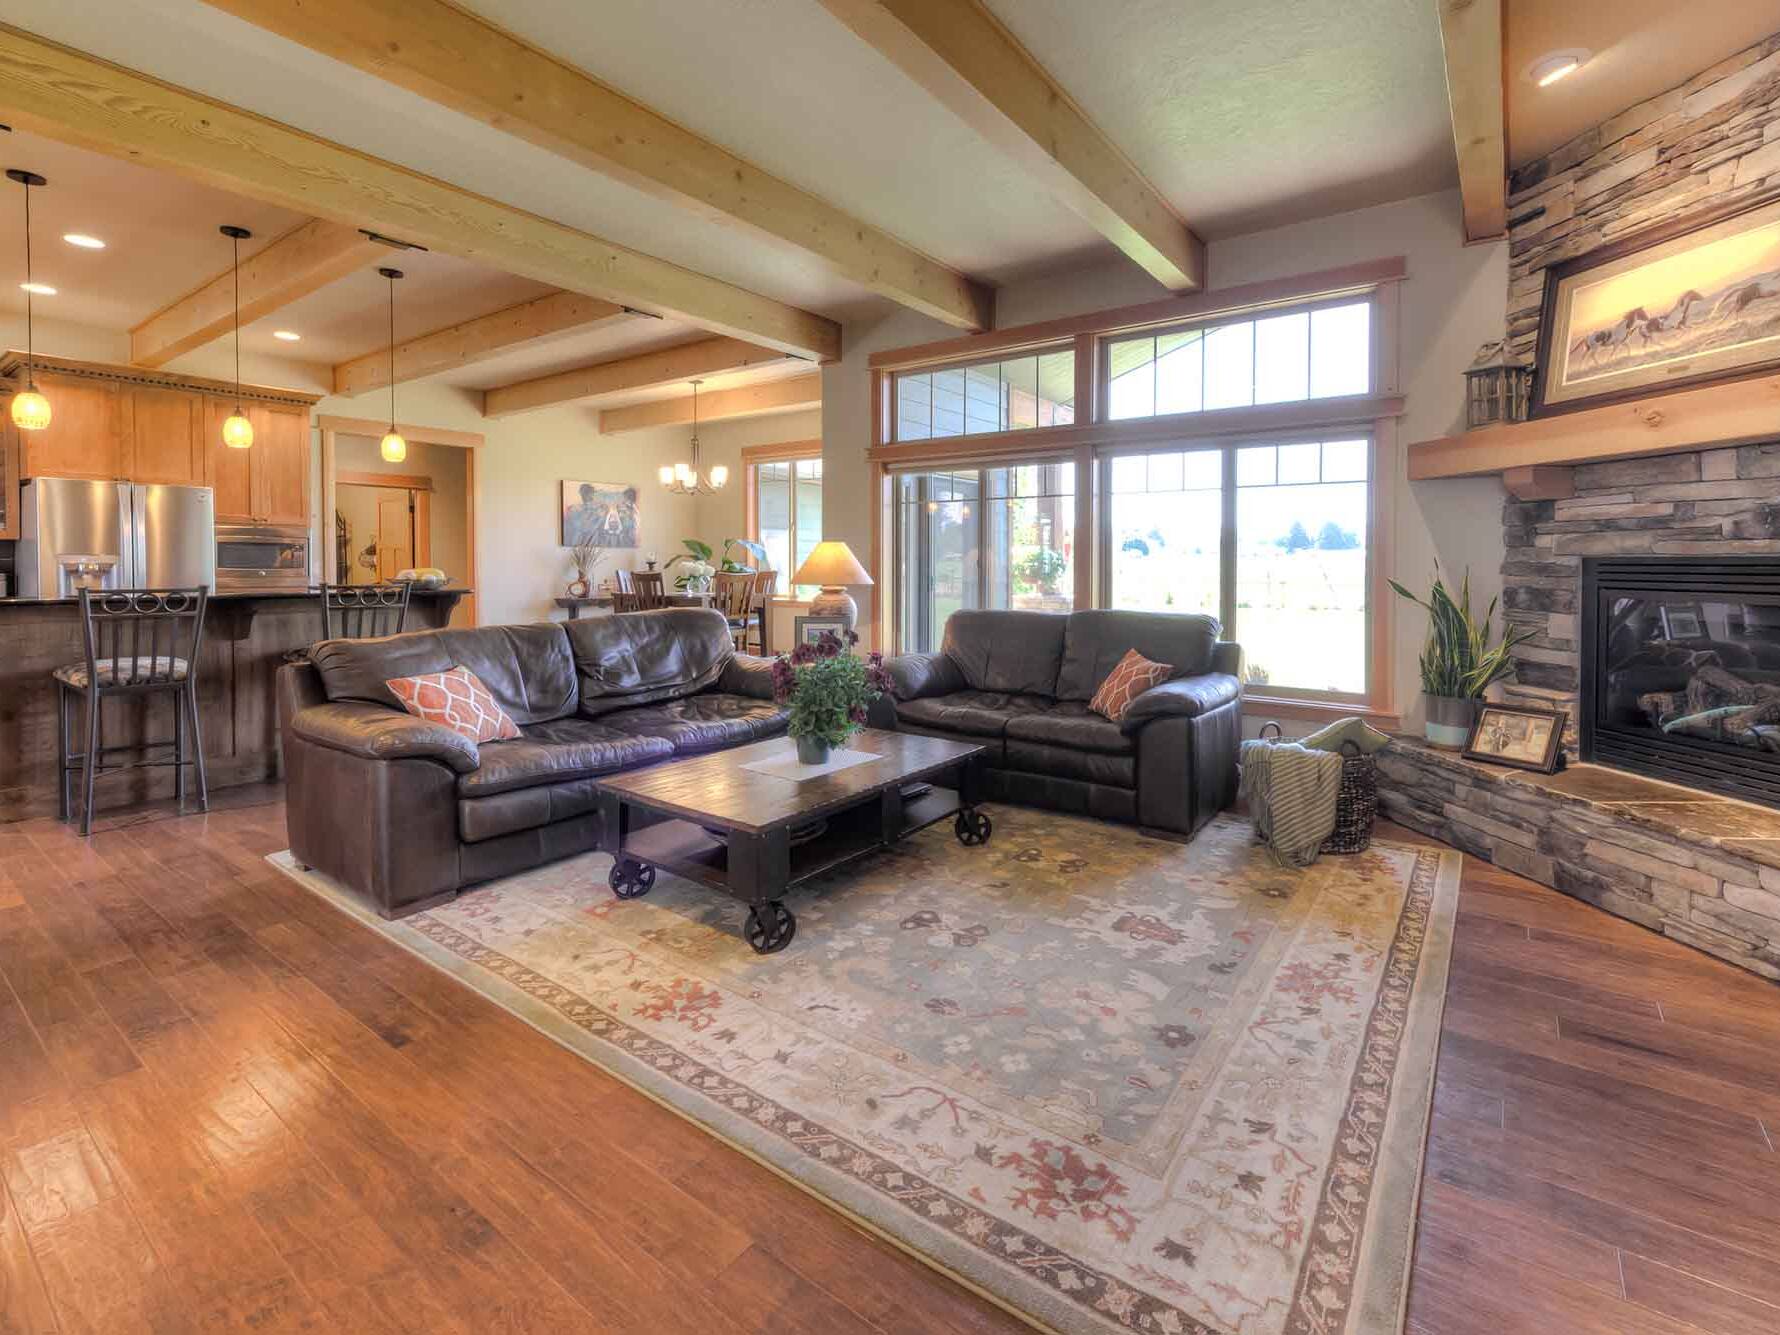 Living room with ceiling beams, a corner fireplace, and wood flooring inside a custom home built by Big Sky Builders in Hamilton Montana